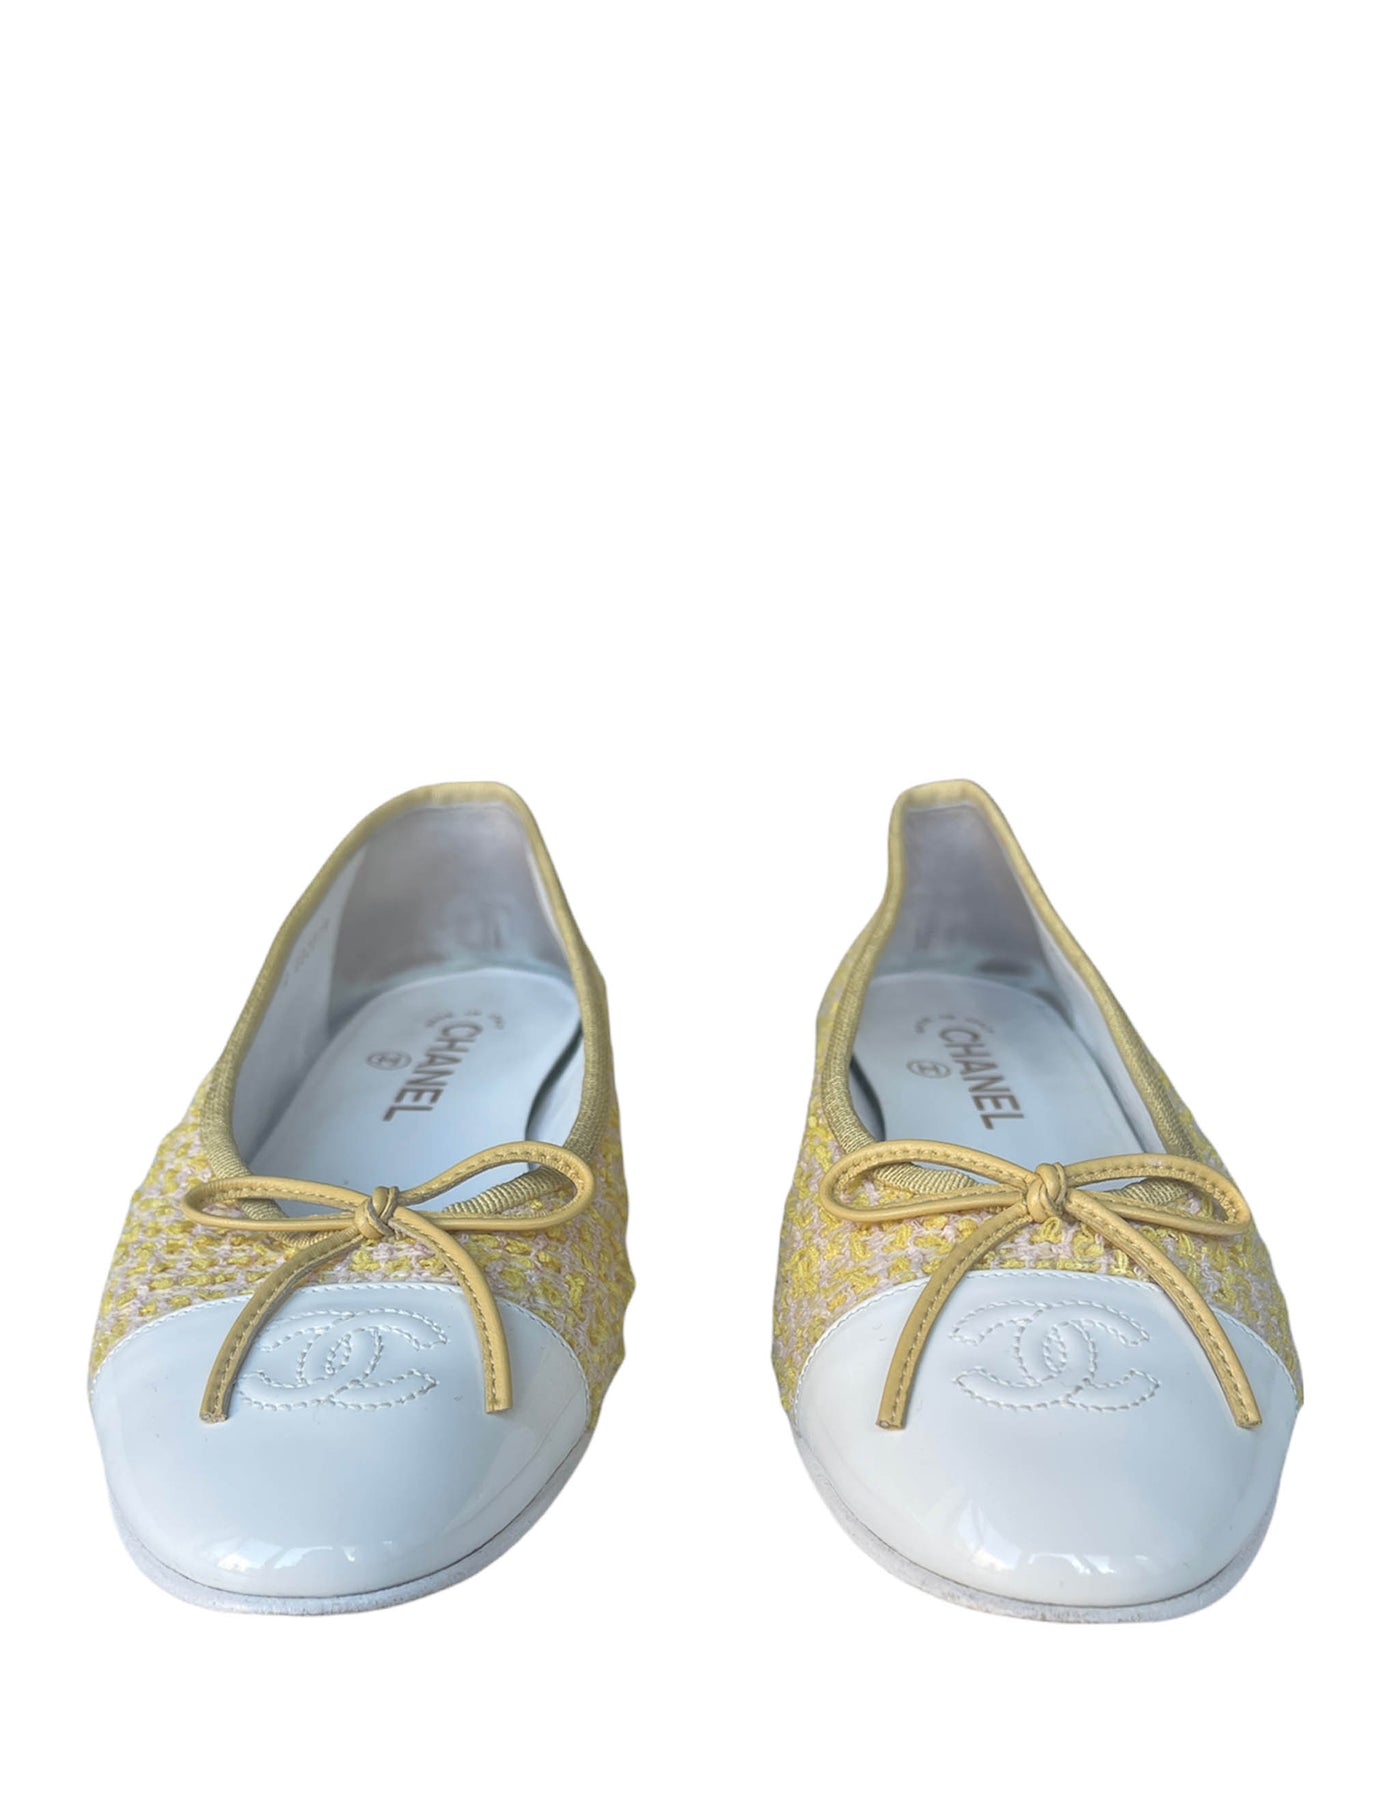 Chanel Shoes Ballerina Ballet Flats White / Black 39 / 9 New – Mightychic